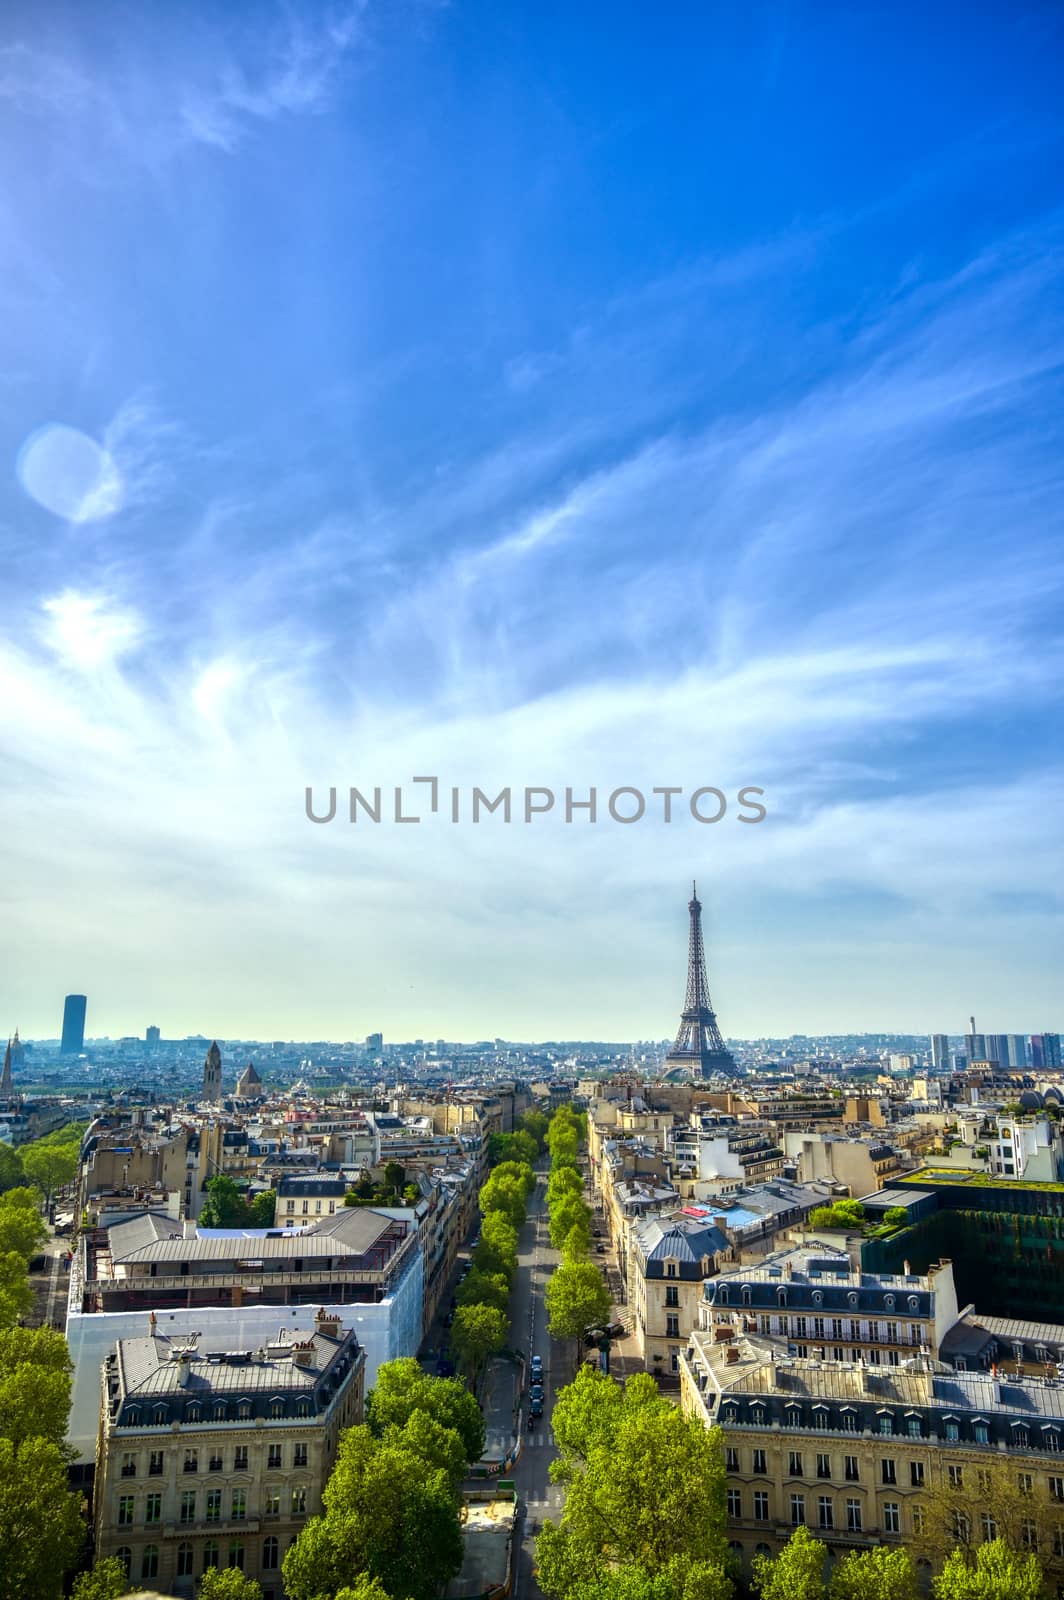 Eiffel Tower and Paris, France from the Arc de Triomphe by jbyard22